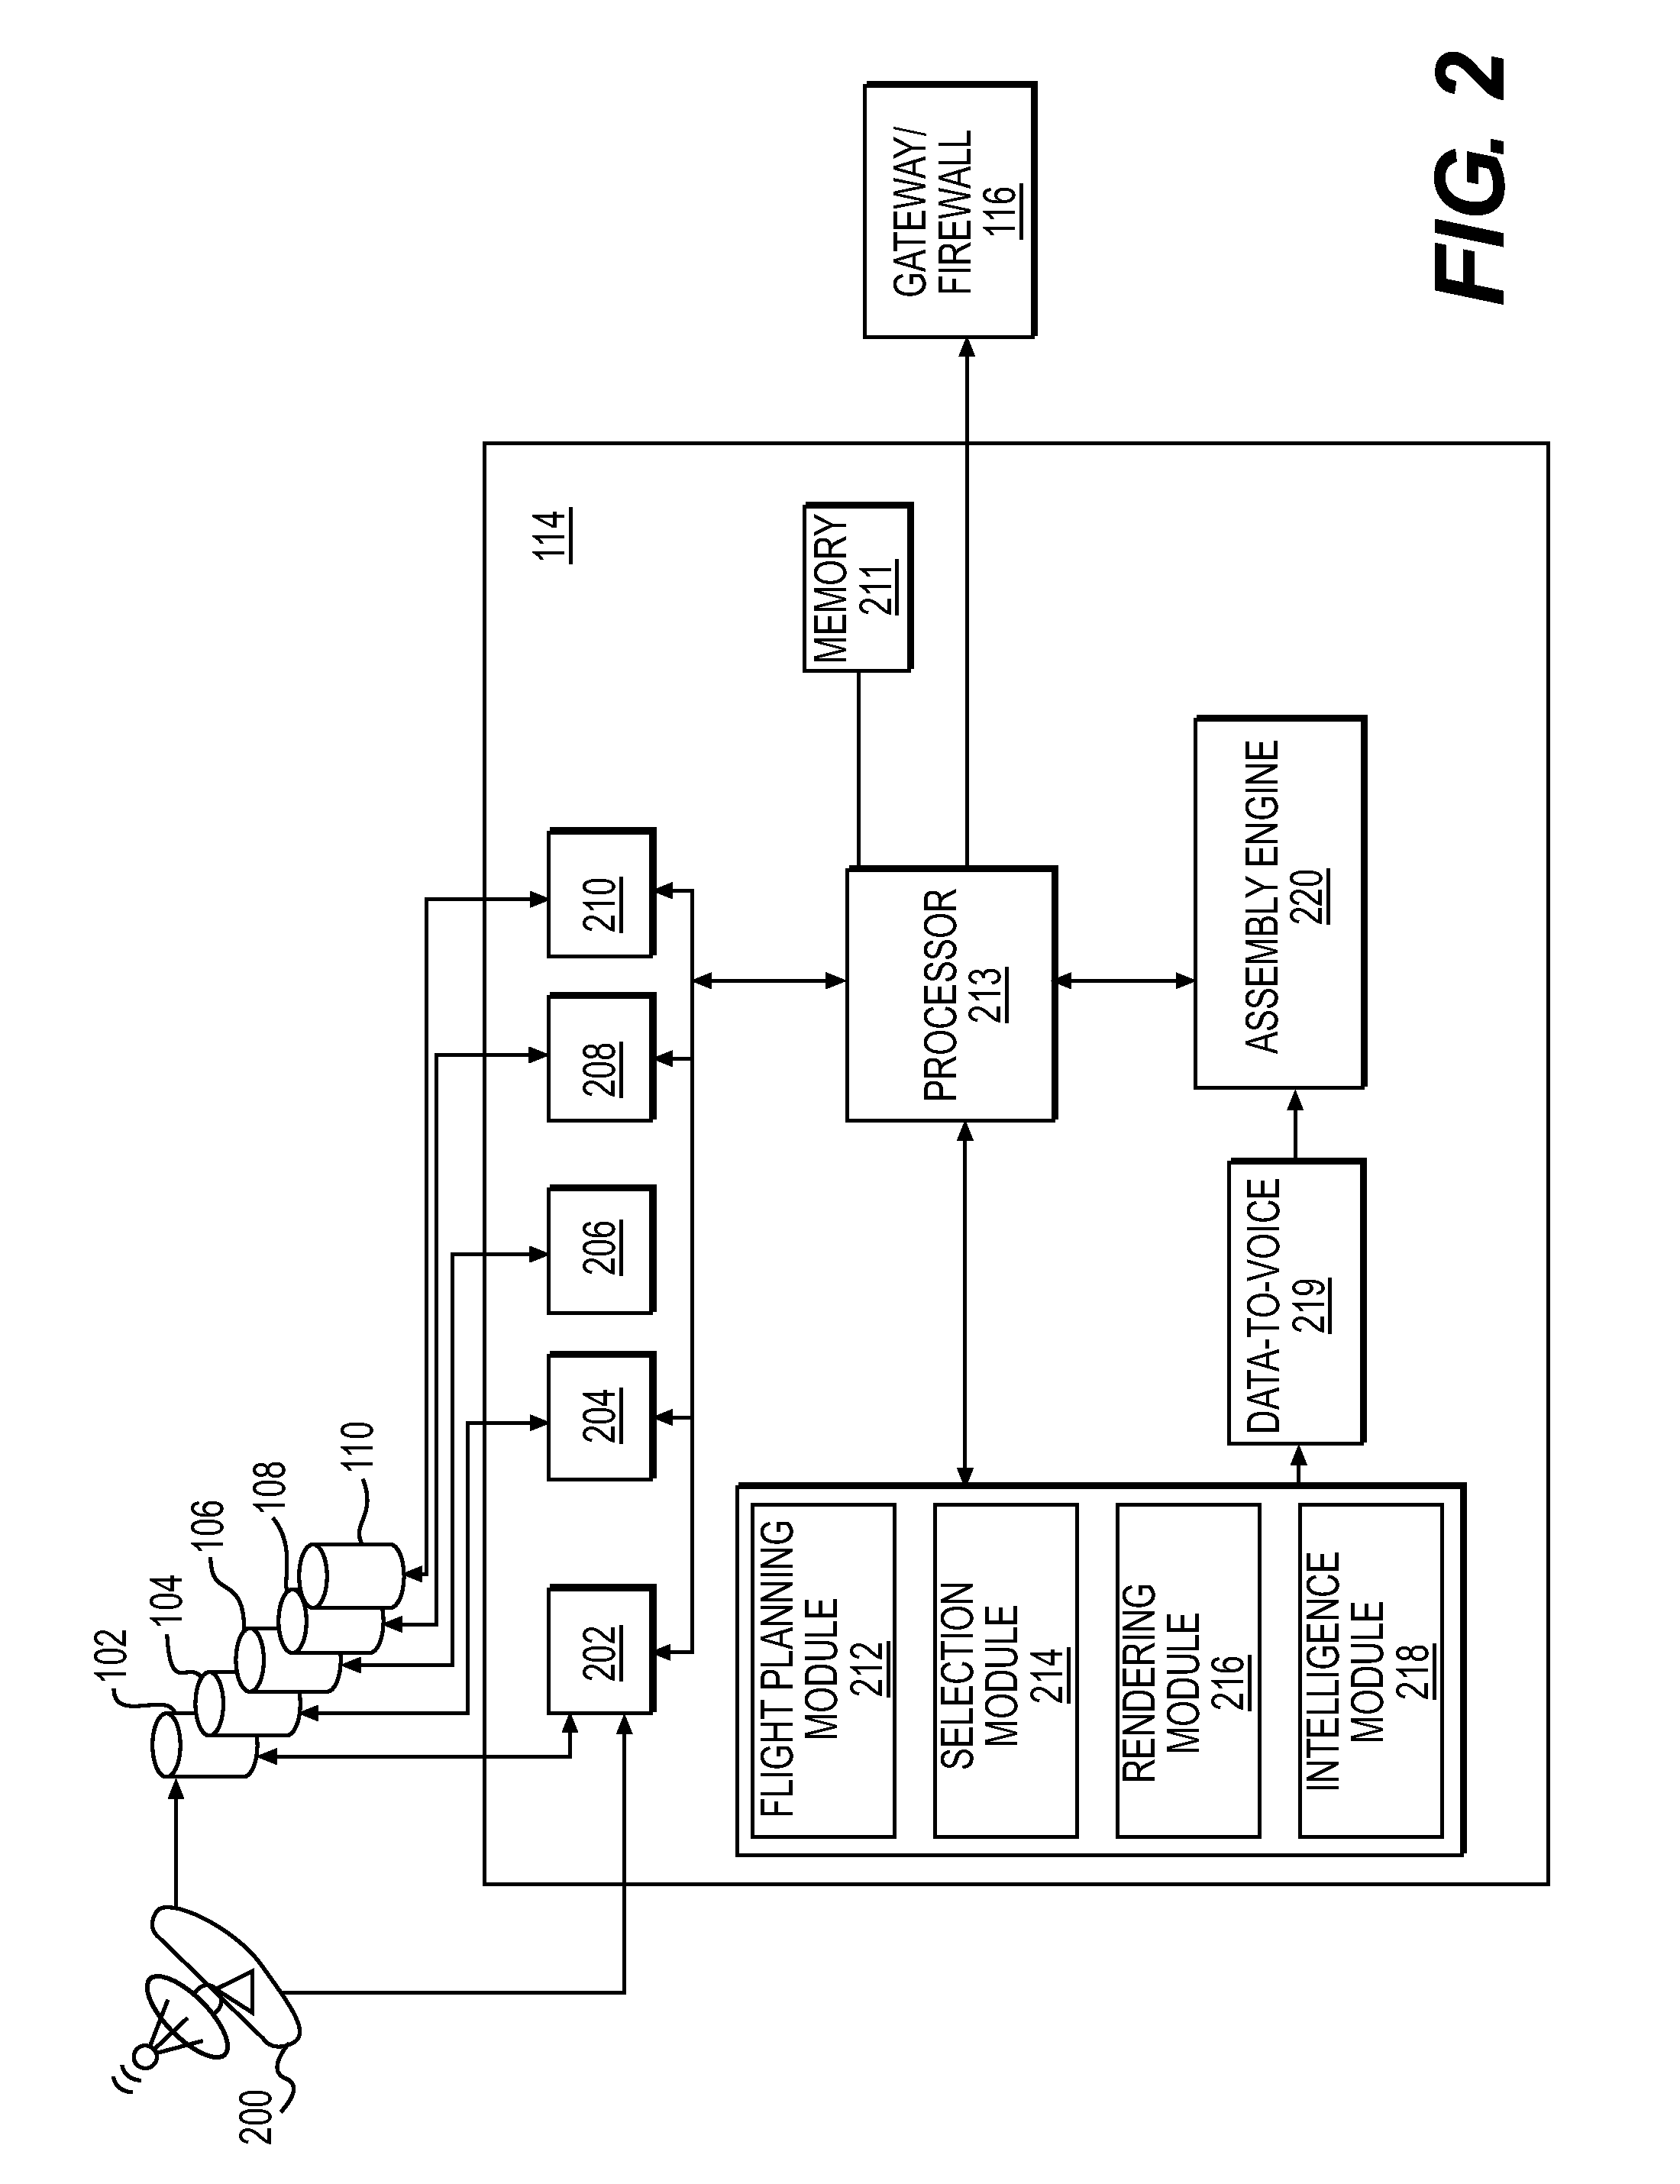 Systems and methods for providing a vehicle movement path simulation over a network